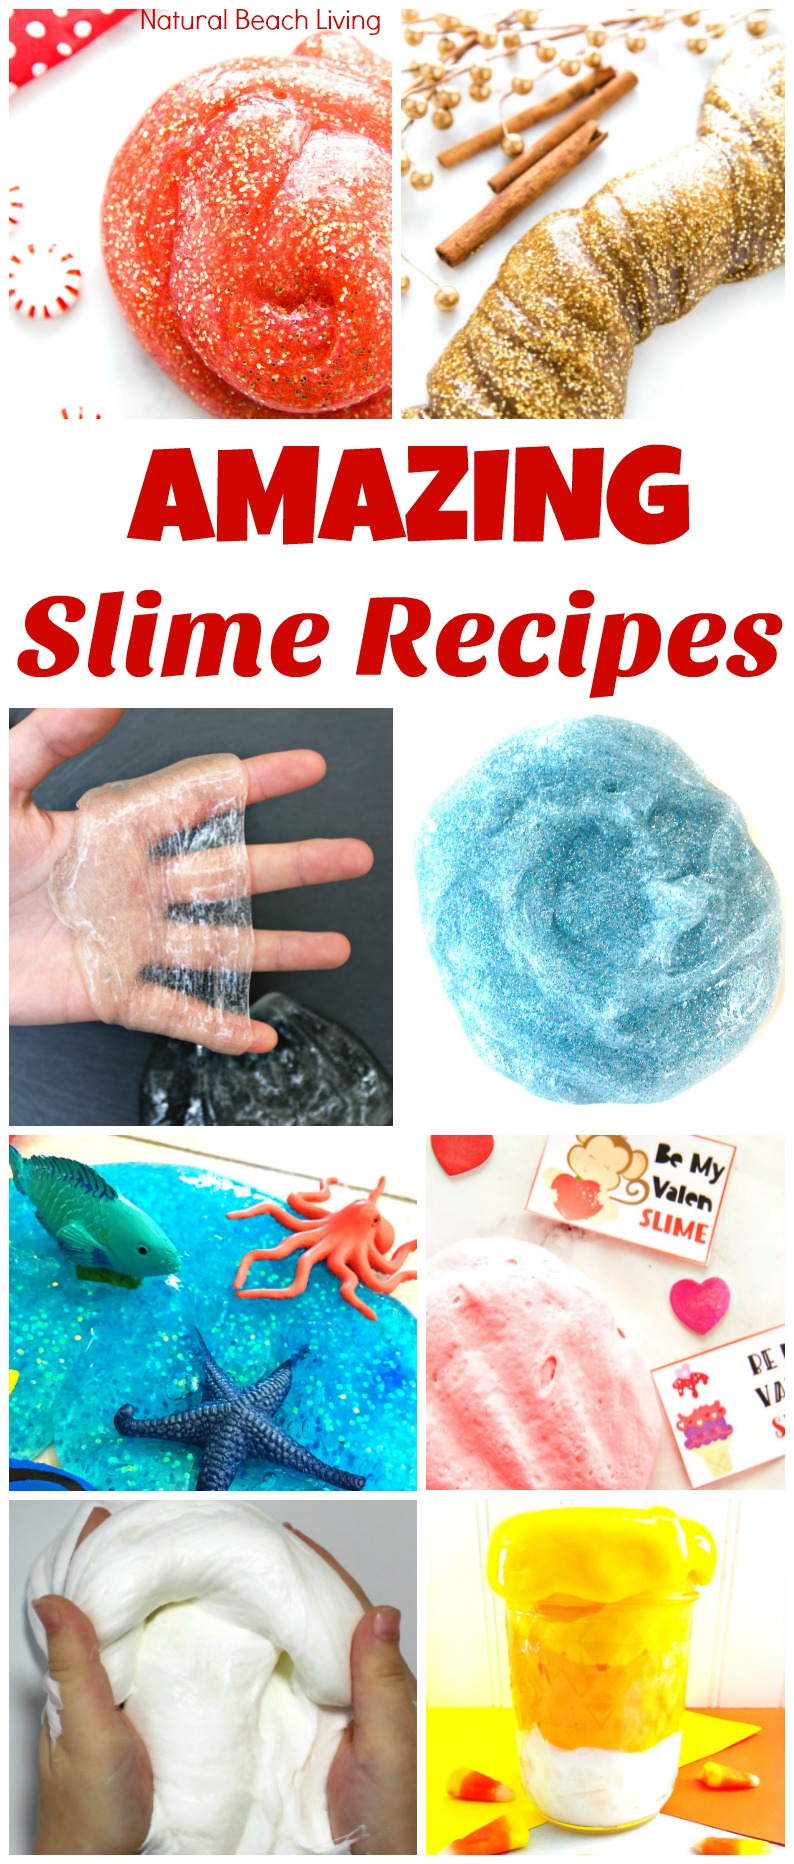 Calming Lavender Slime Recipe To Try Right Now, Anti Stress Slime Recipe, aromatherapy Slime Recipe, The Best Liquid Starch Slime, The Best Calming Lavender Slime Recipe, How to make The Best Calming Jiggly Slime Recipe, how to make Anxiety Slime, Slime Recipe with essential oils, A Wonderful Therapeutic Slime Recipe, Slime Science, Plus Slime Videos with How to Make Slime Instructions and DIY Slime Recipes